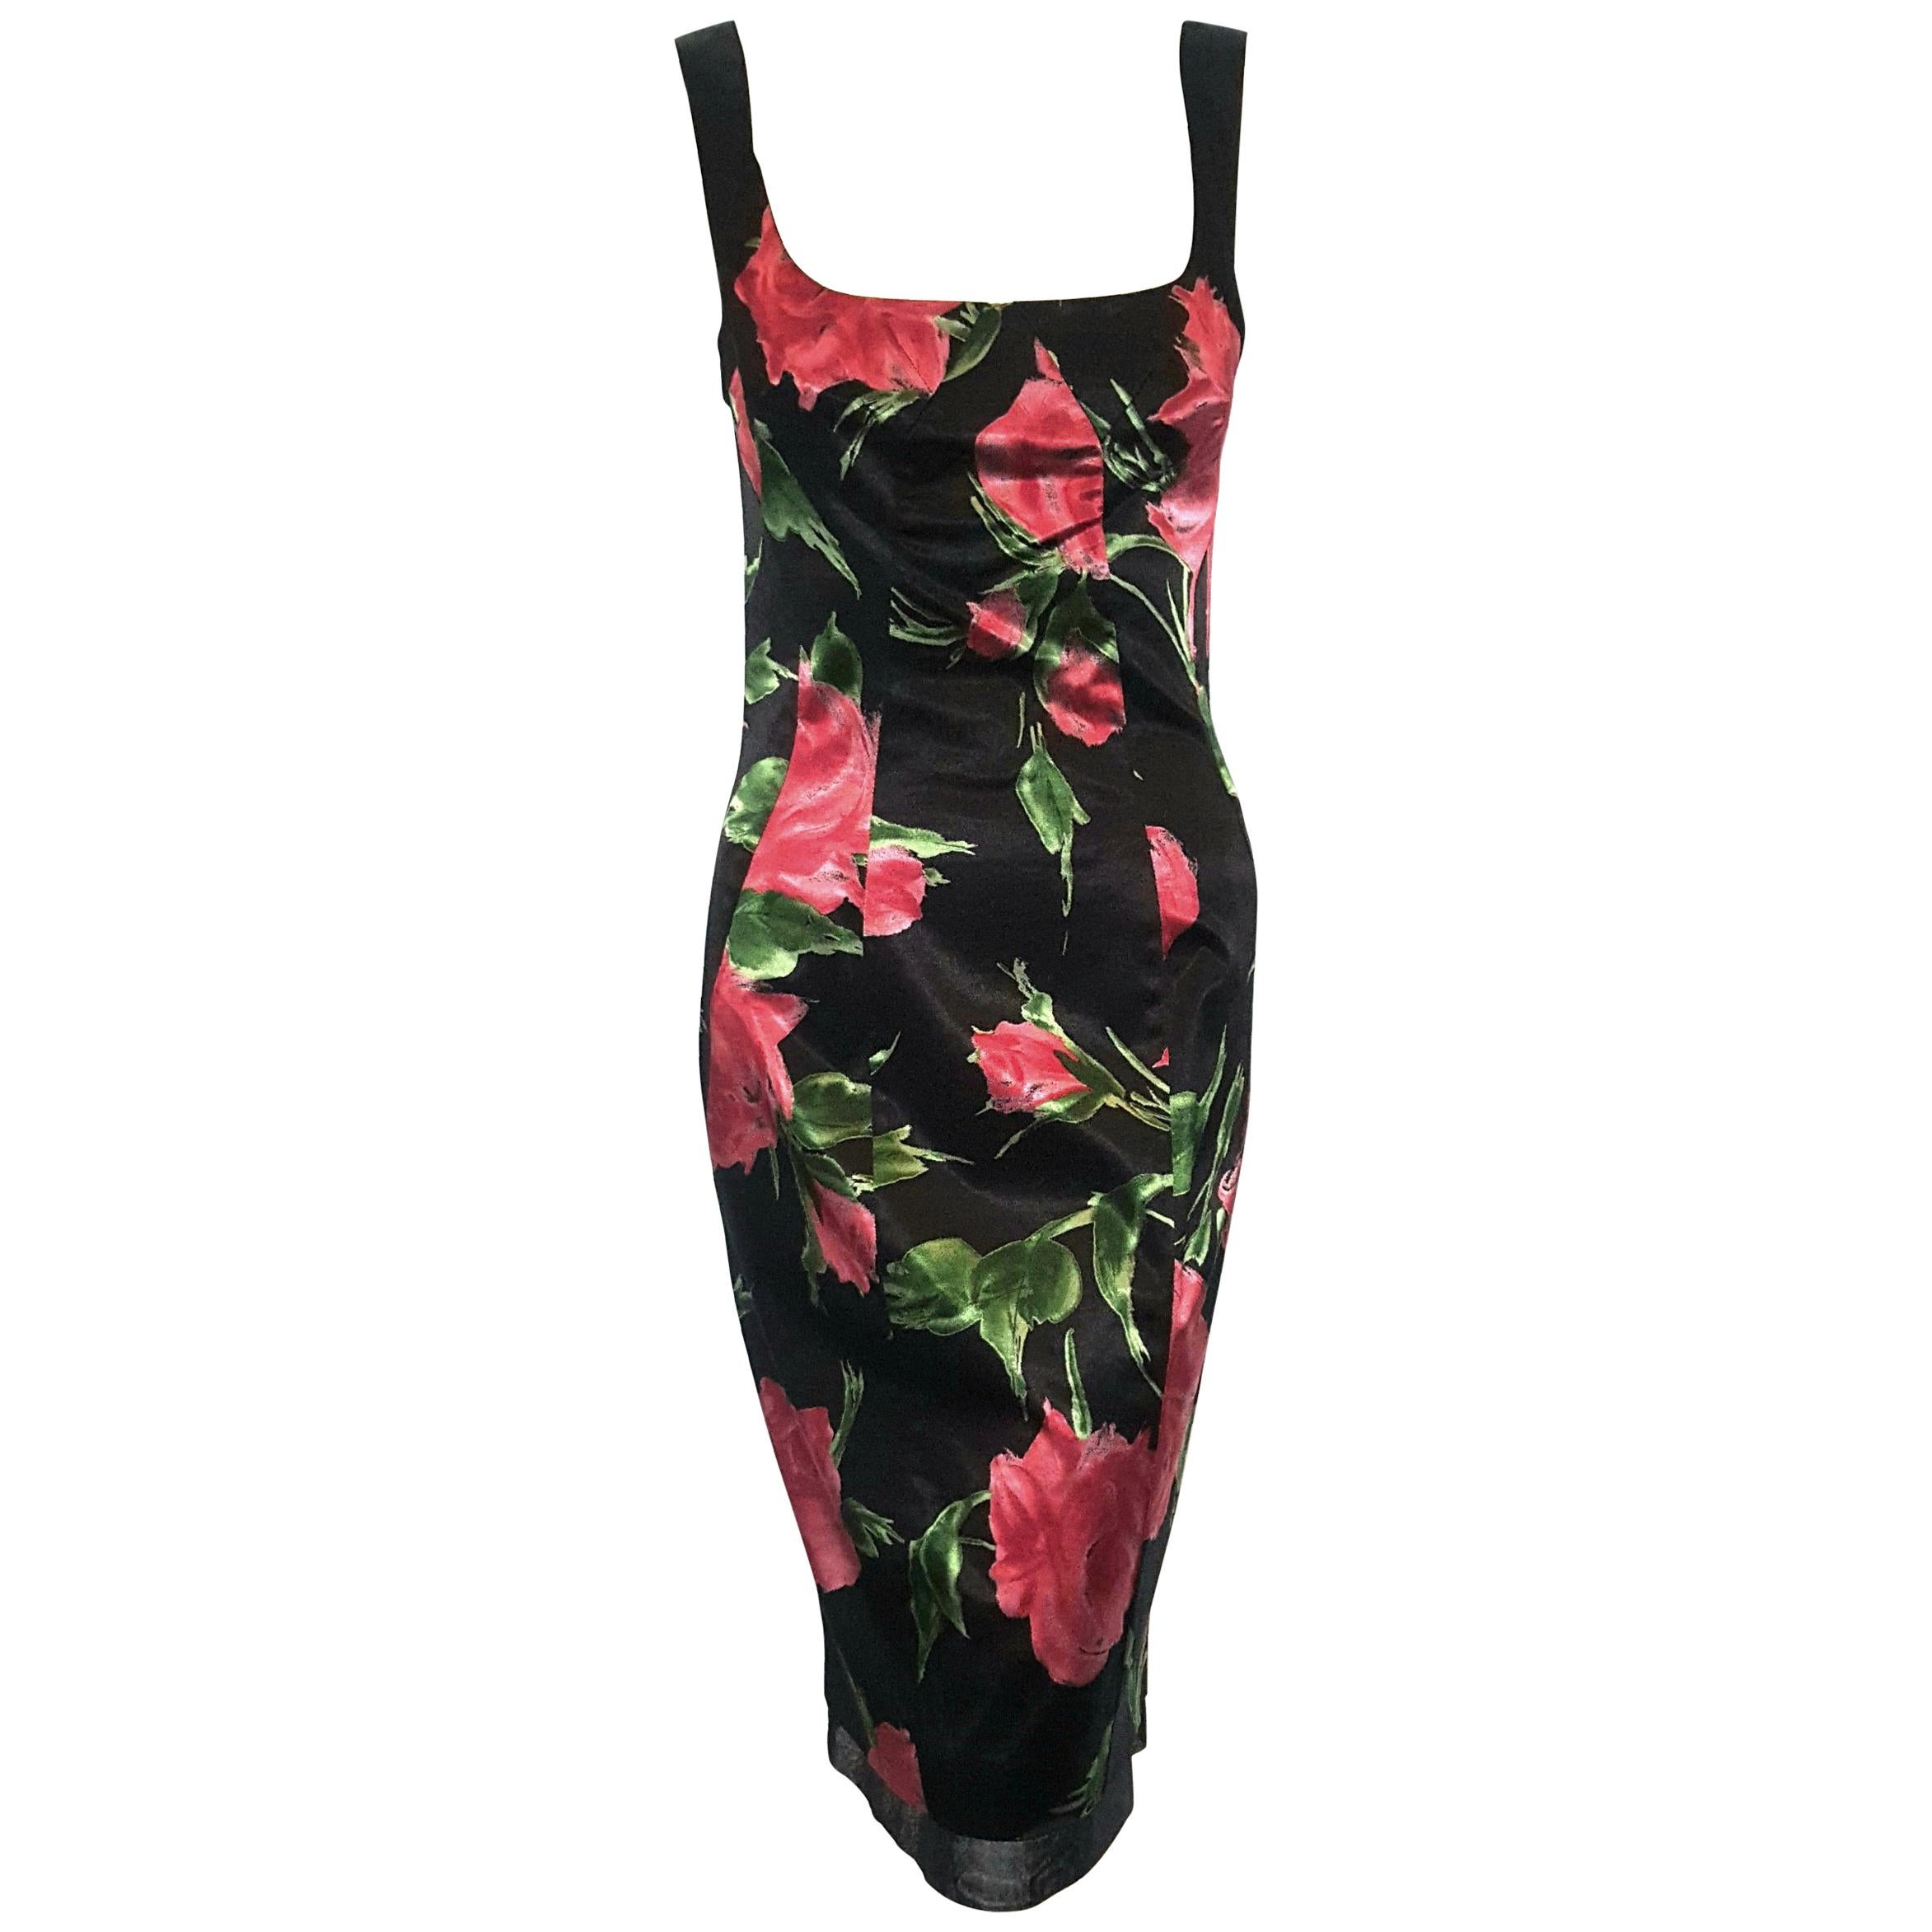 Only Under 40  D&G Black and Red Floral Satin Sleeveless Dress  For Sale